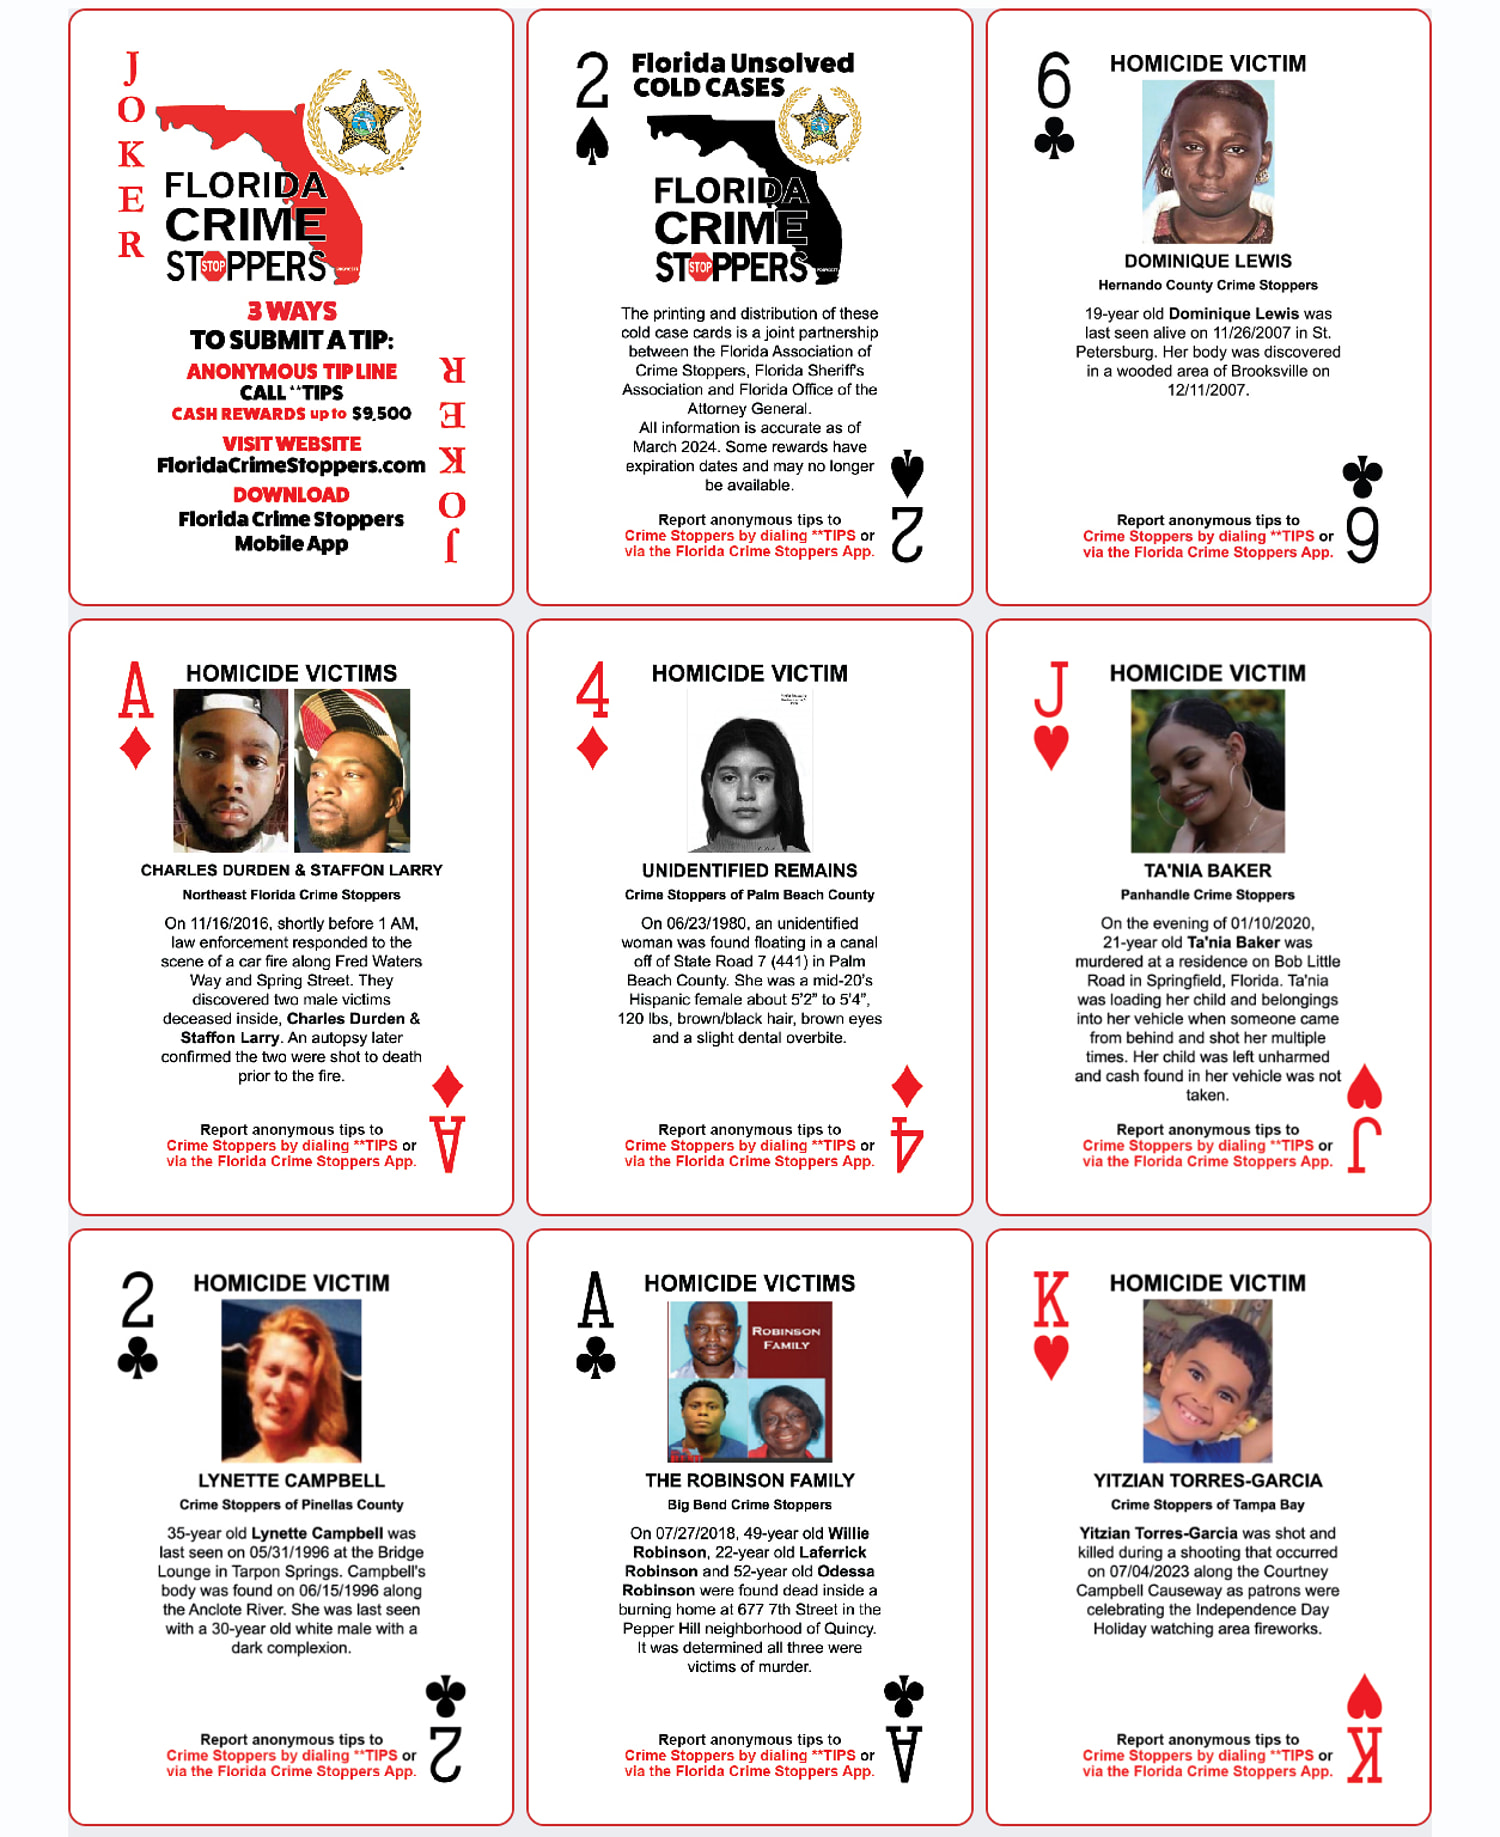 Florida officials to release cold case playing cards in hopes of cracking new leads